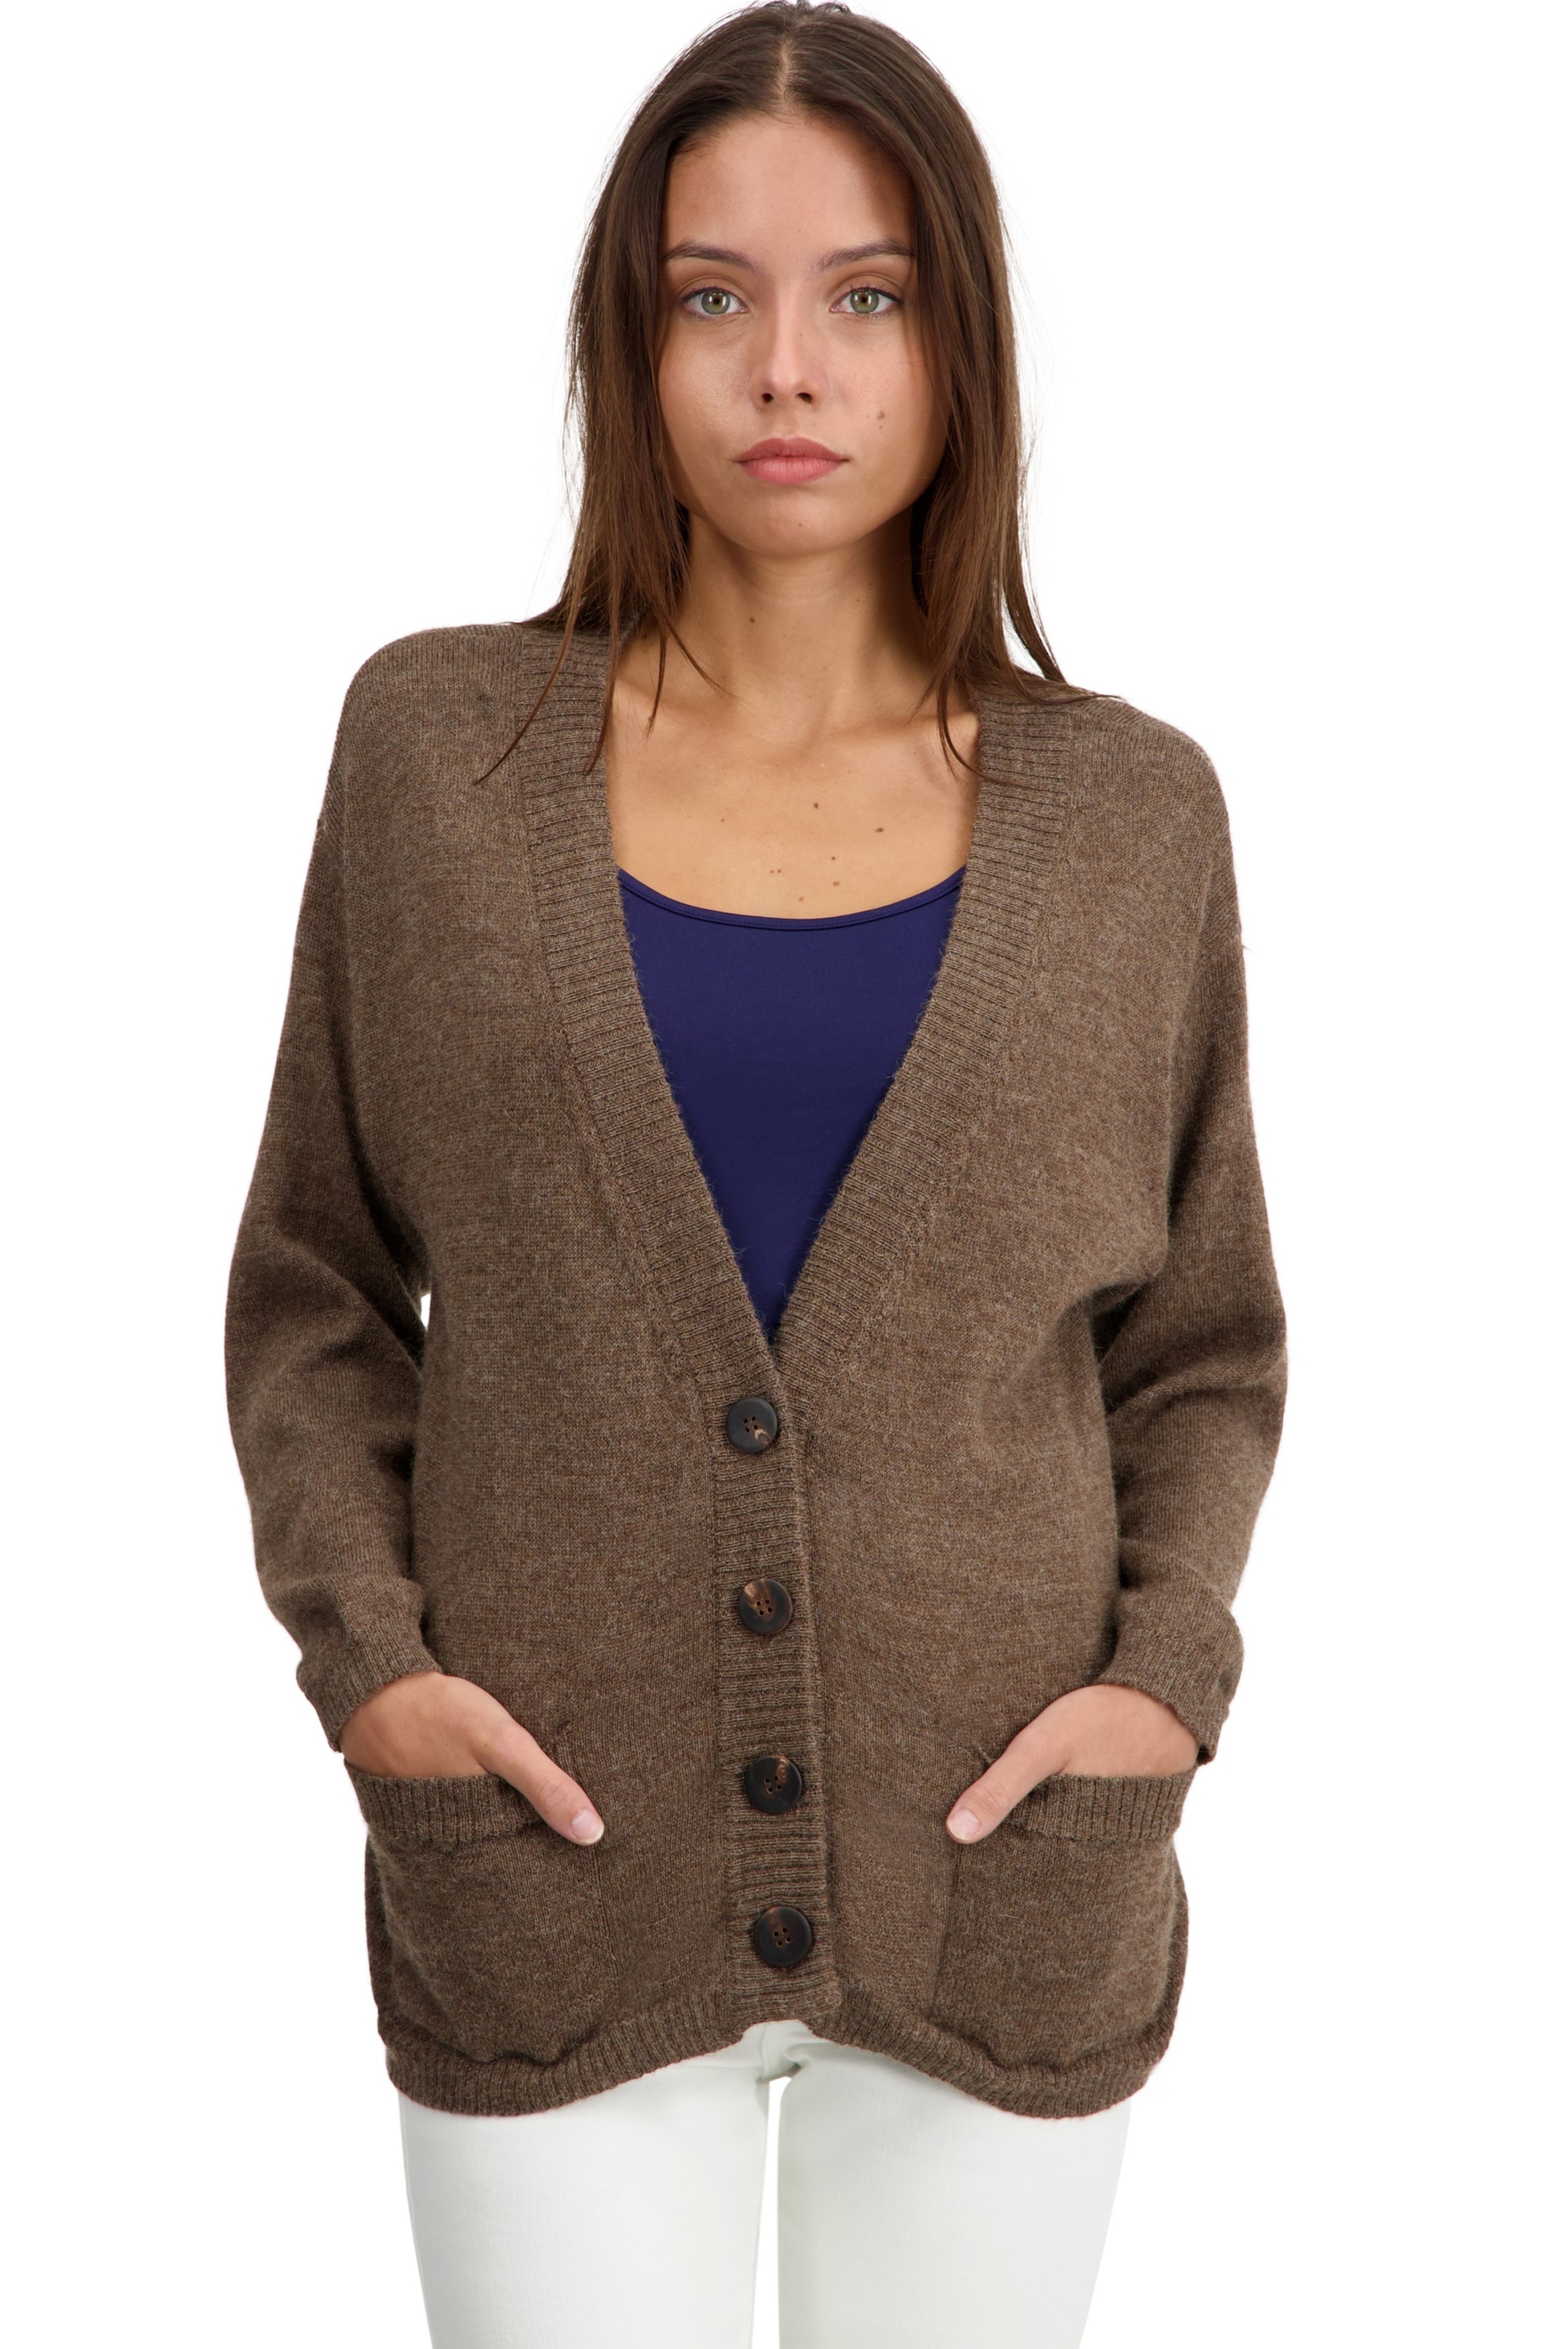 Baby Alpaca ladies cardigans toulouse natural xs